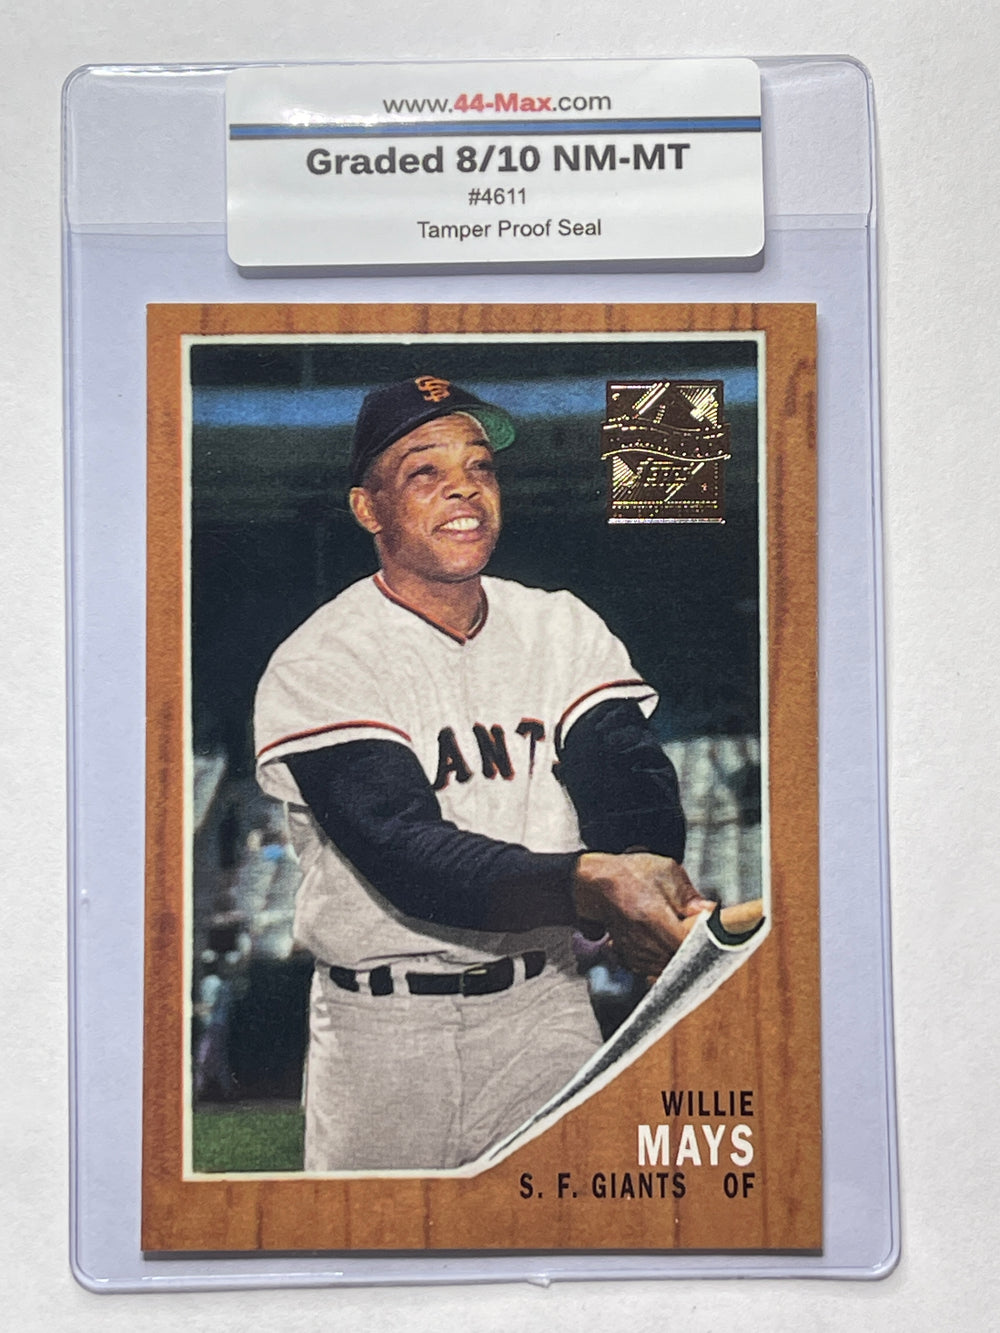 Willie Mays 1996 Topps Baseball Card. 44-Max 8/10 NM-MT #4611